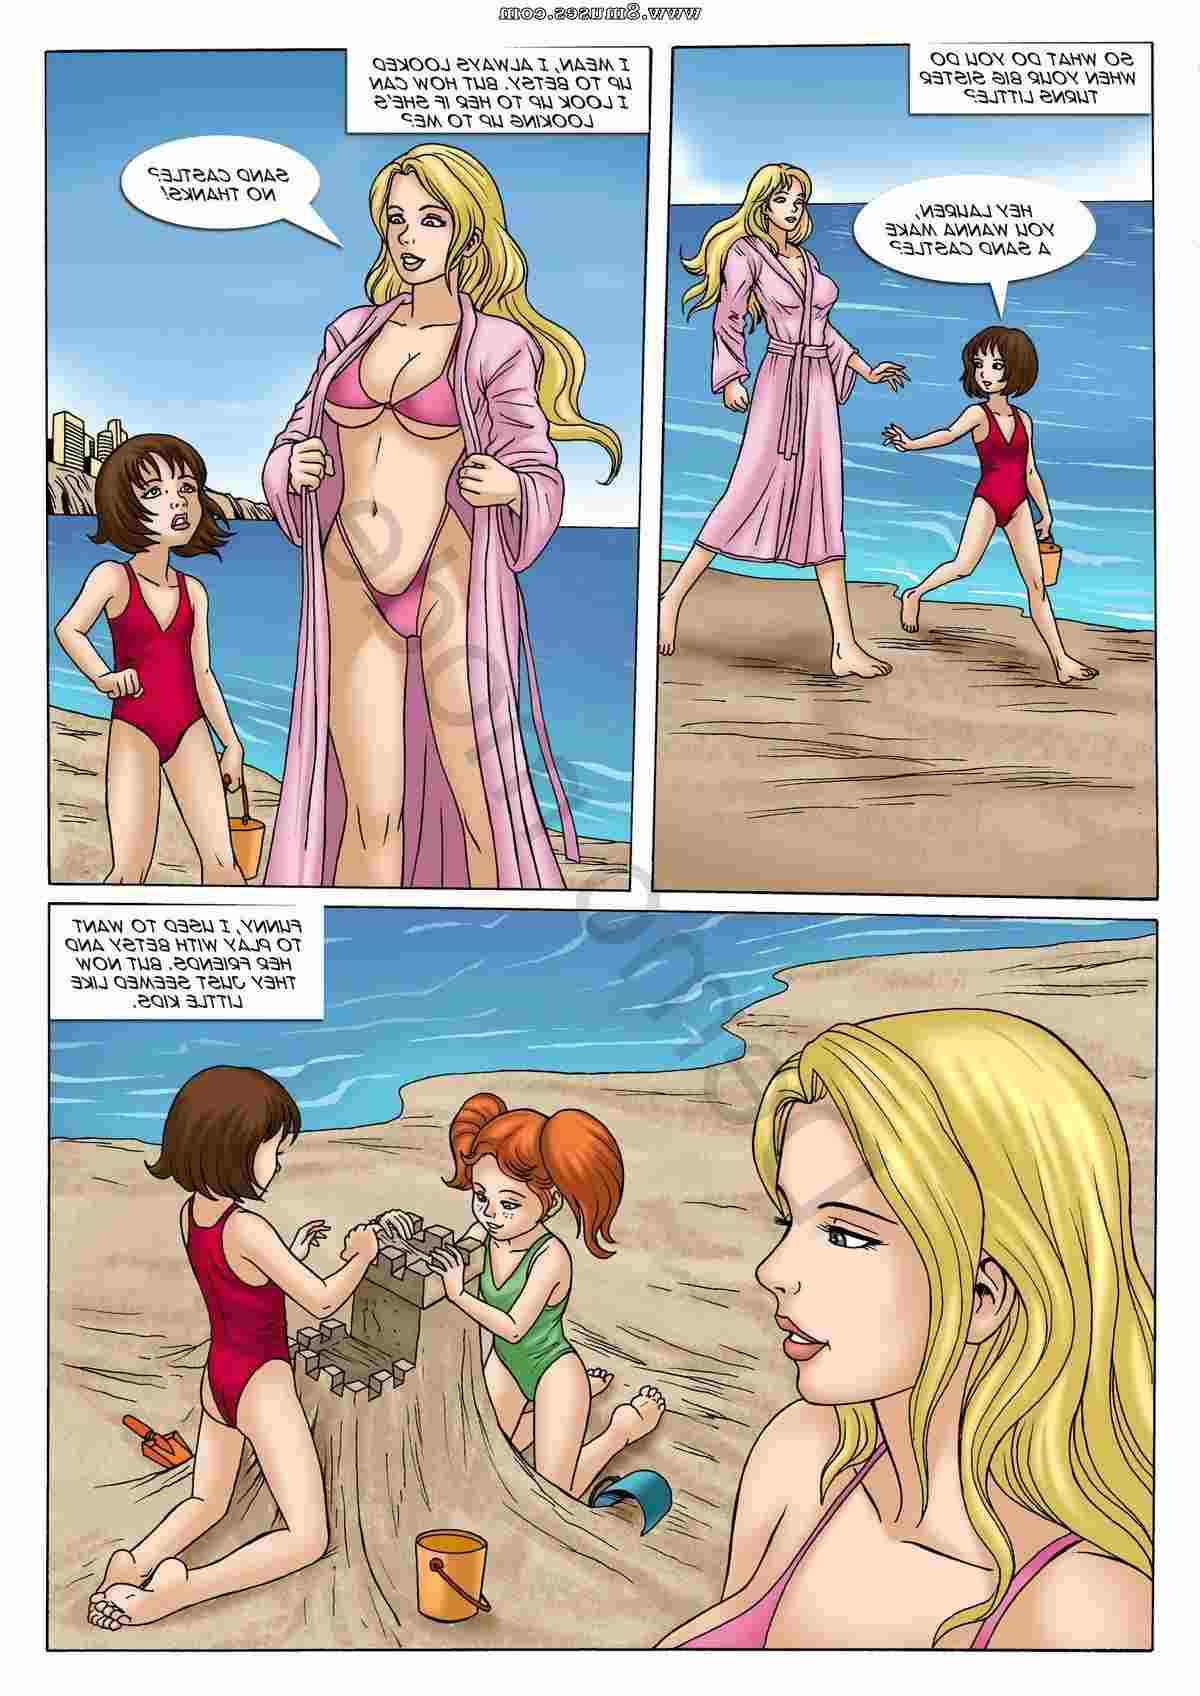 DreamTales-Comics/A-Tale-of-Two-Sisters A_Tale_of_Two_Sisters__8muses_-_Sex_and_Porn_Comics_8.jpg